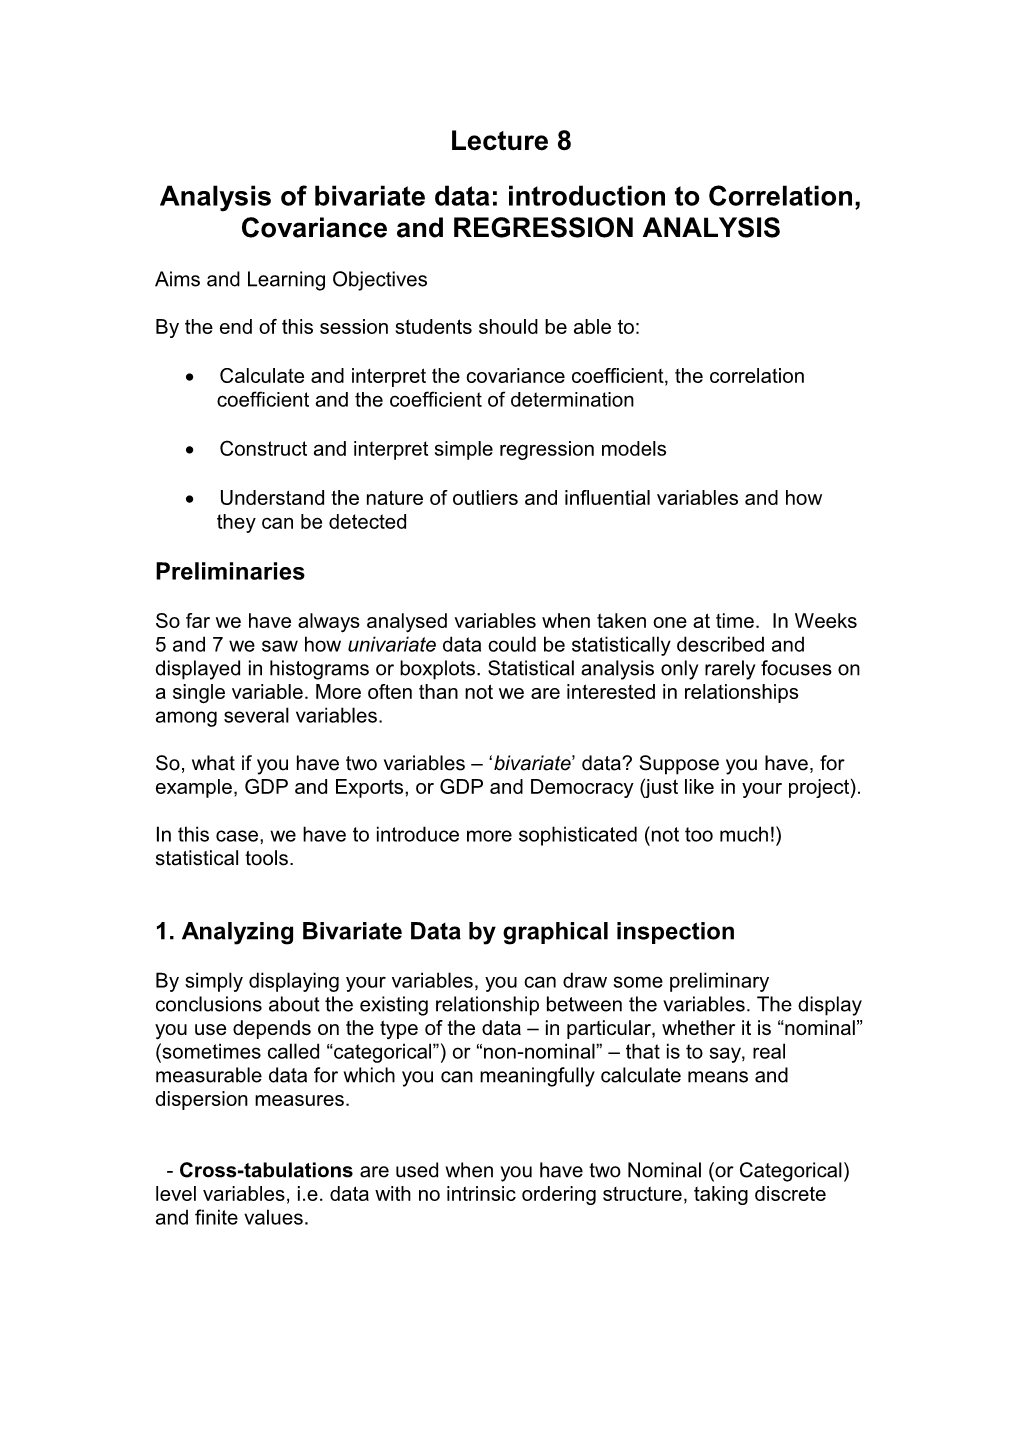 Analysis of Bivariate Data: Introduction to Correlation, Covariance and REGRESSION ANALYSIS